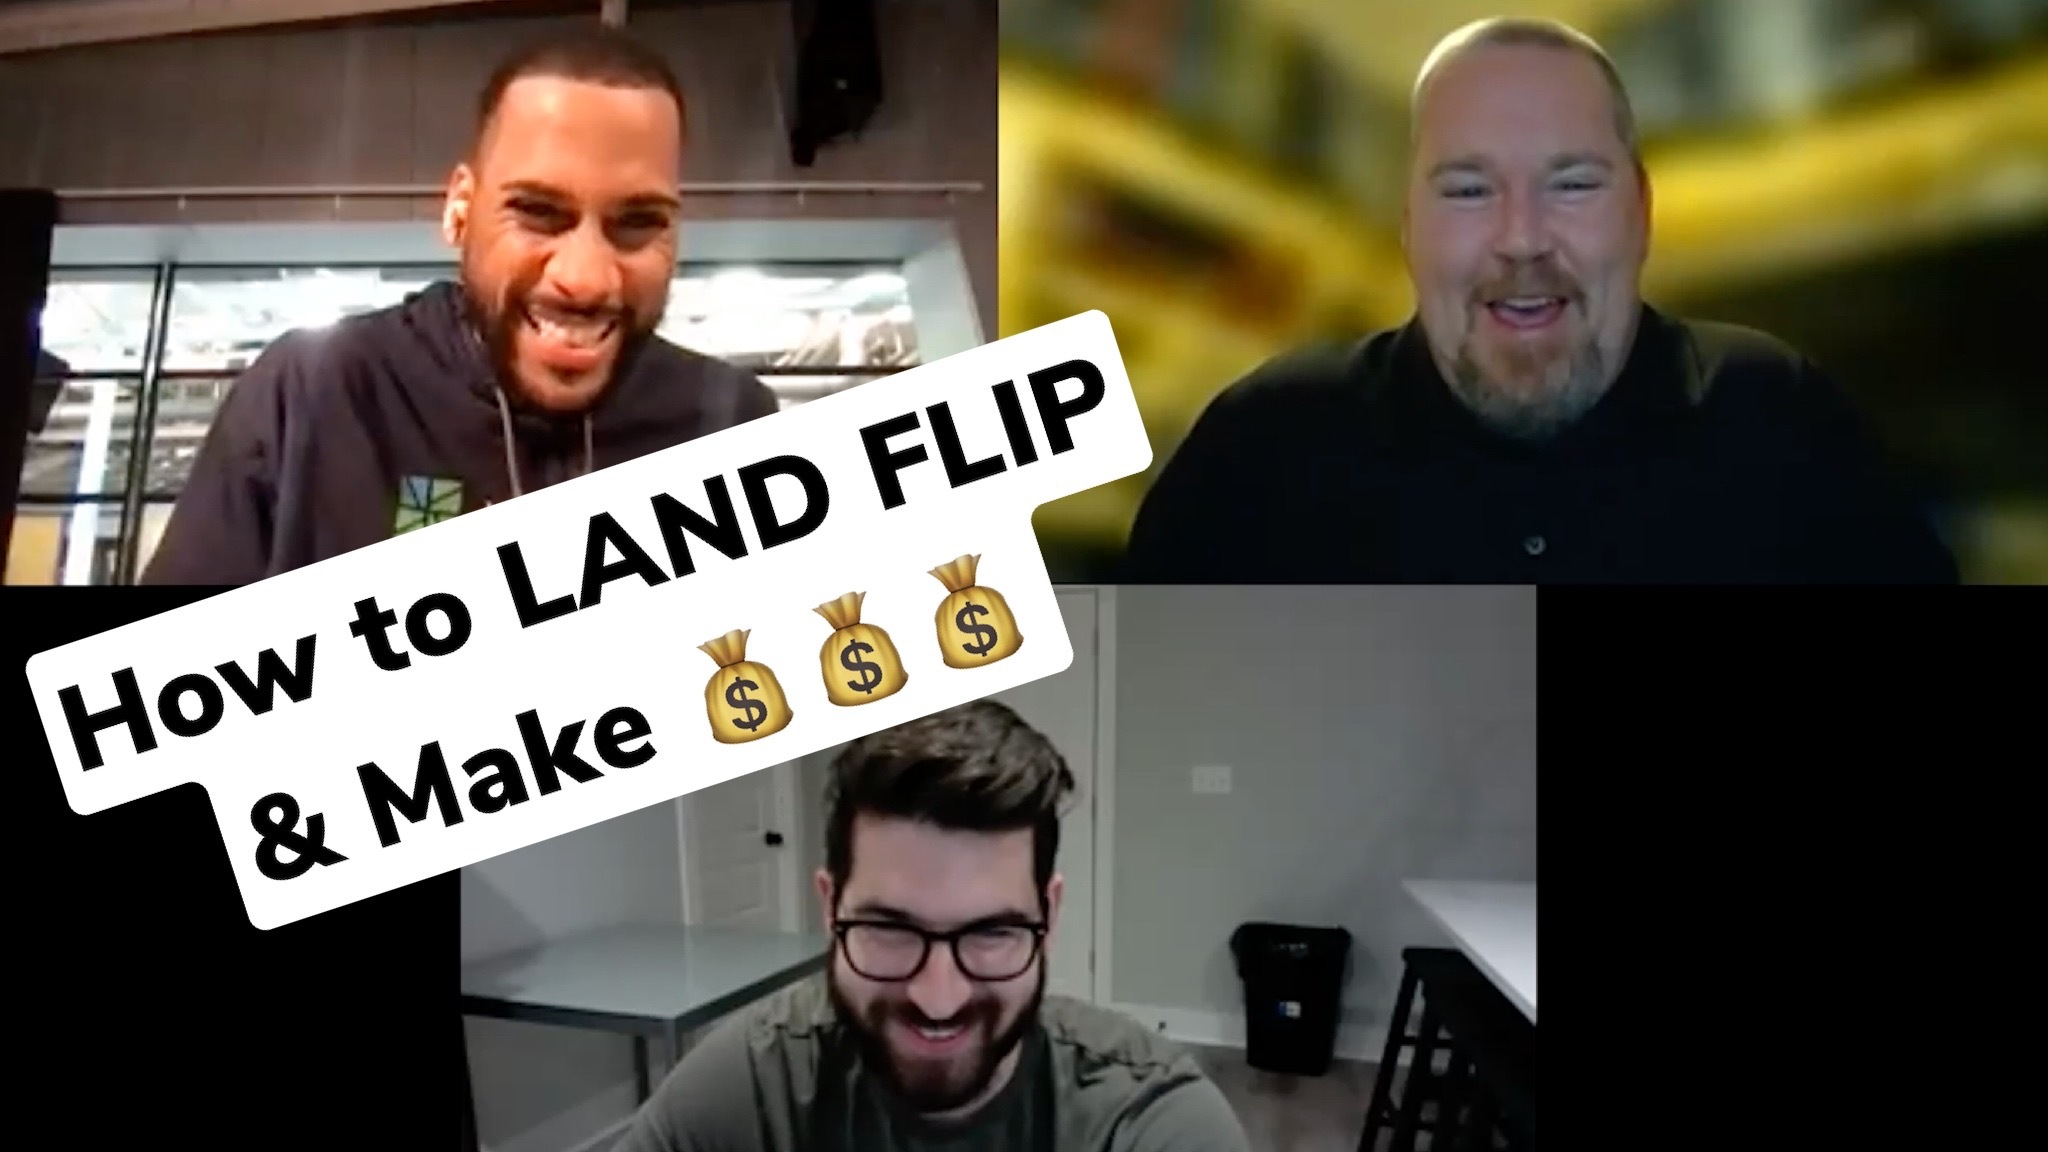 how to land flip and make money tribevest group investing